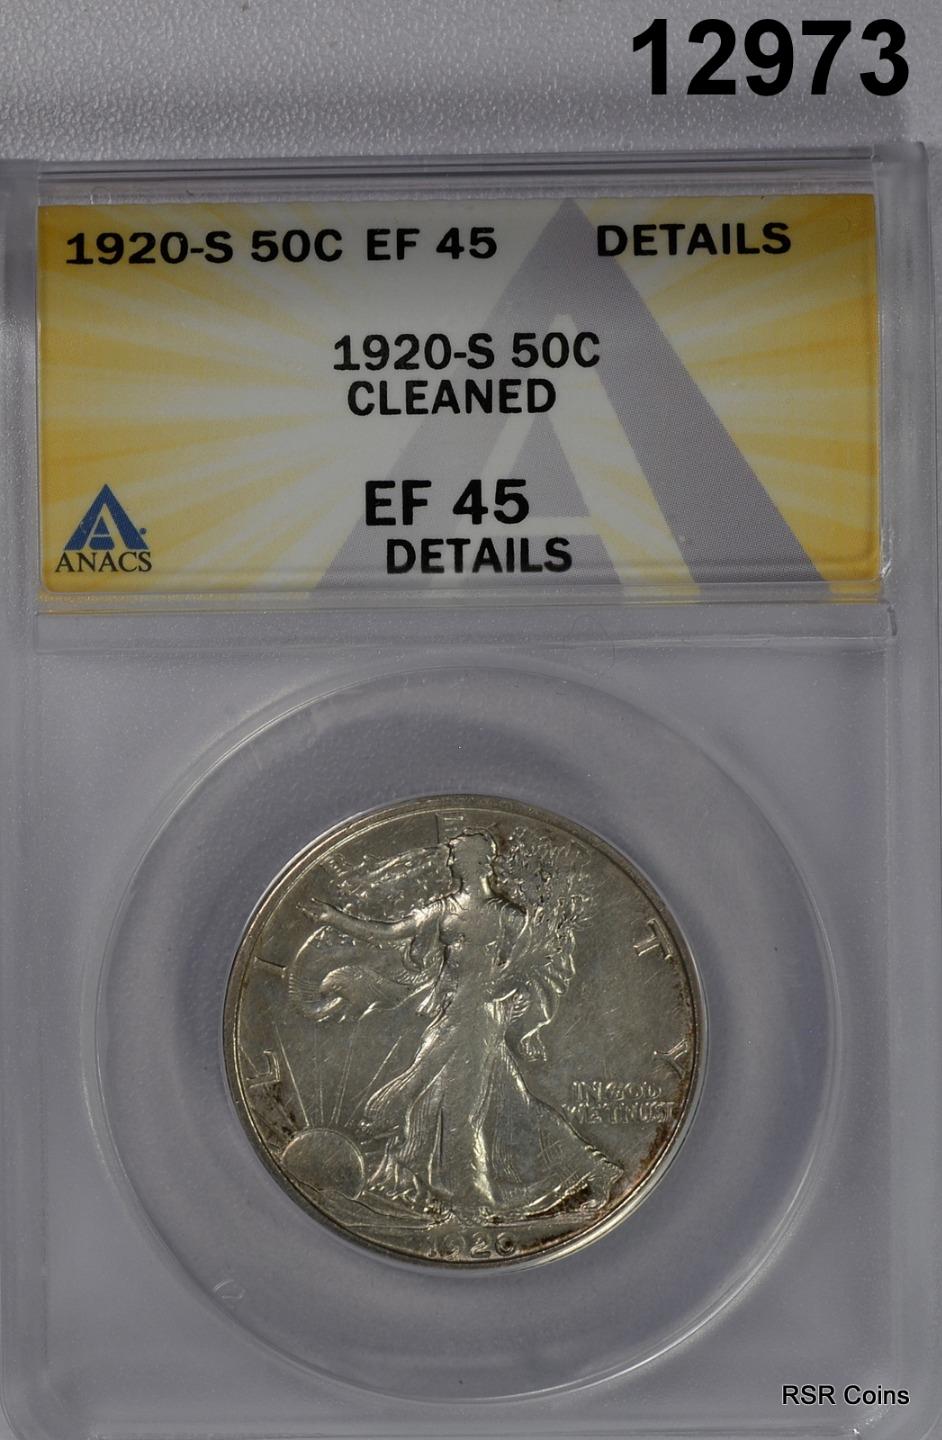 1920 S WALKING LIBERTY HALF ANACS CERTIFIED EF45 CLEANED RARE! #12973